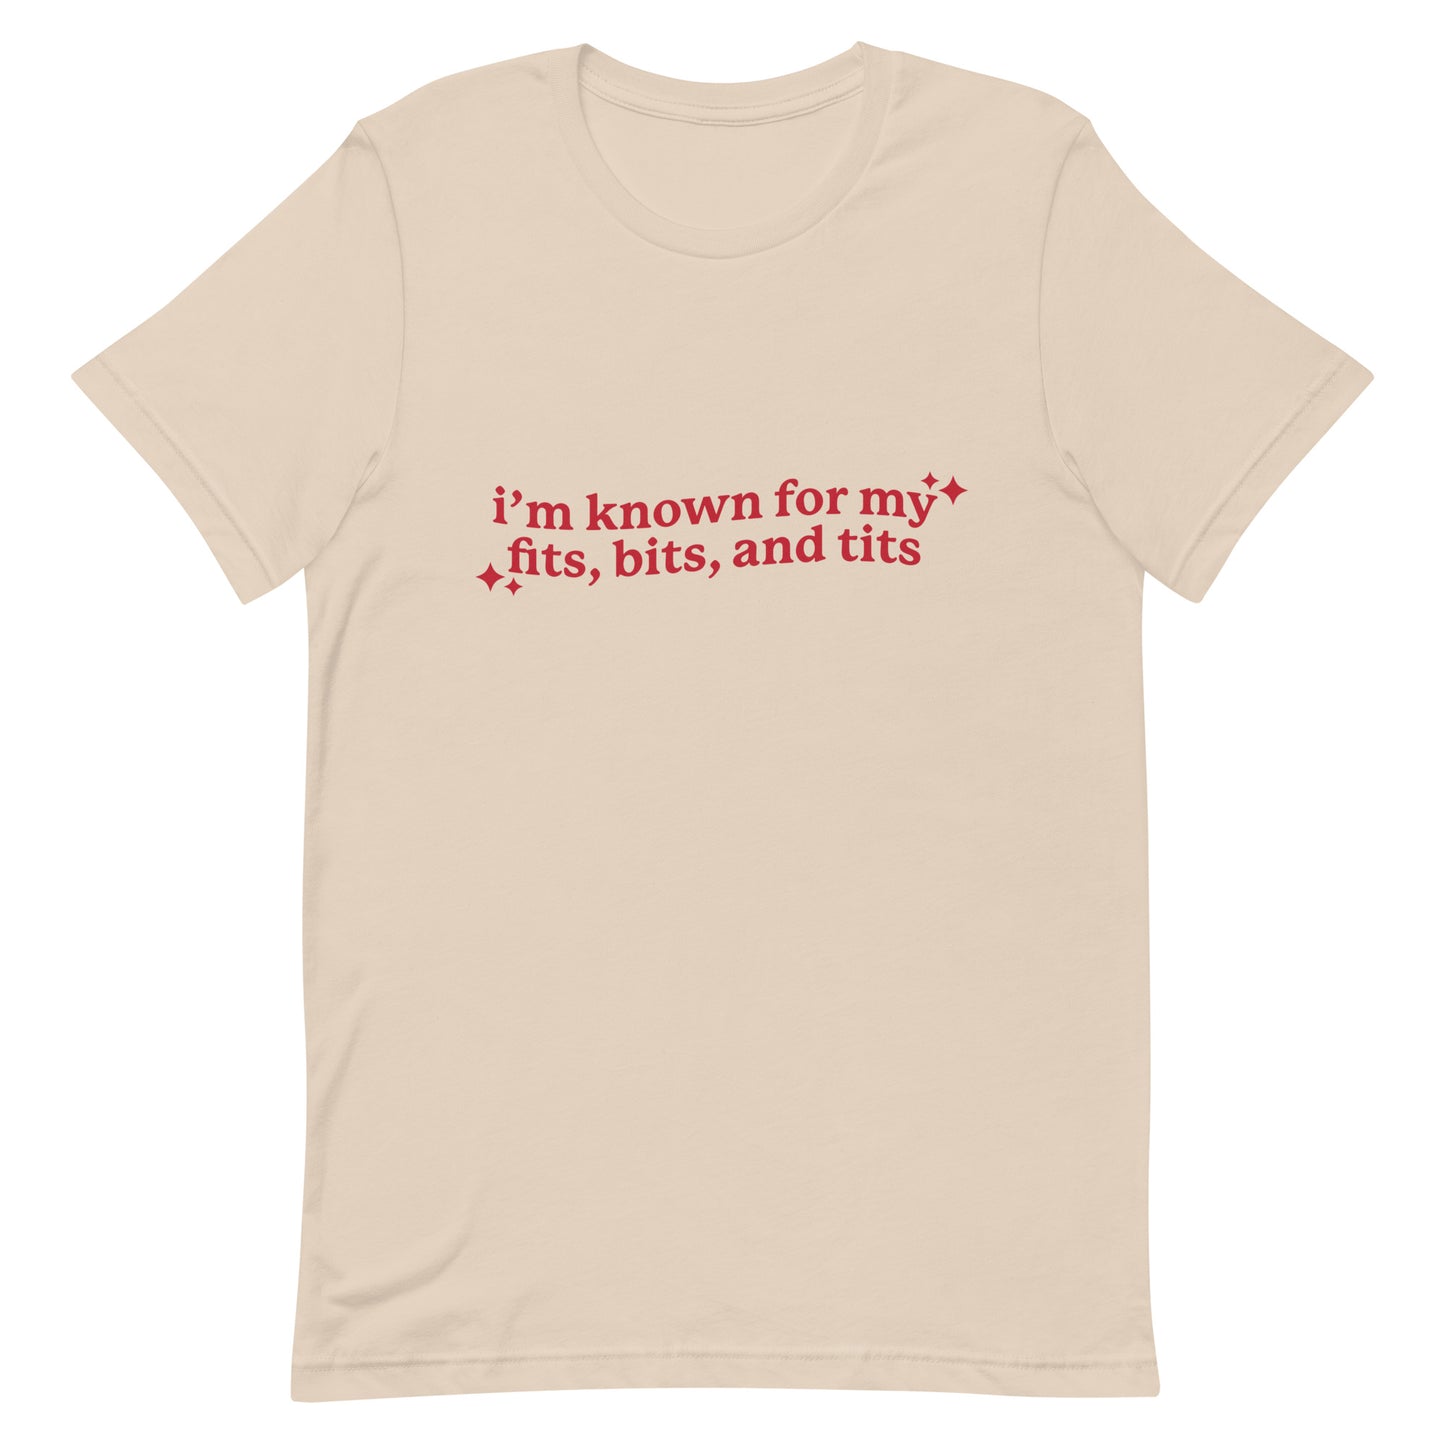 I'm Known For My Fits, Bits, and Tits Unisex t-shirt